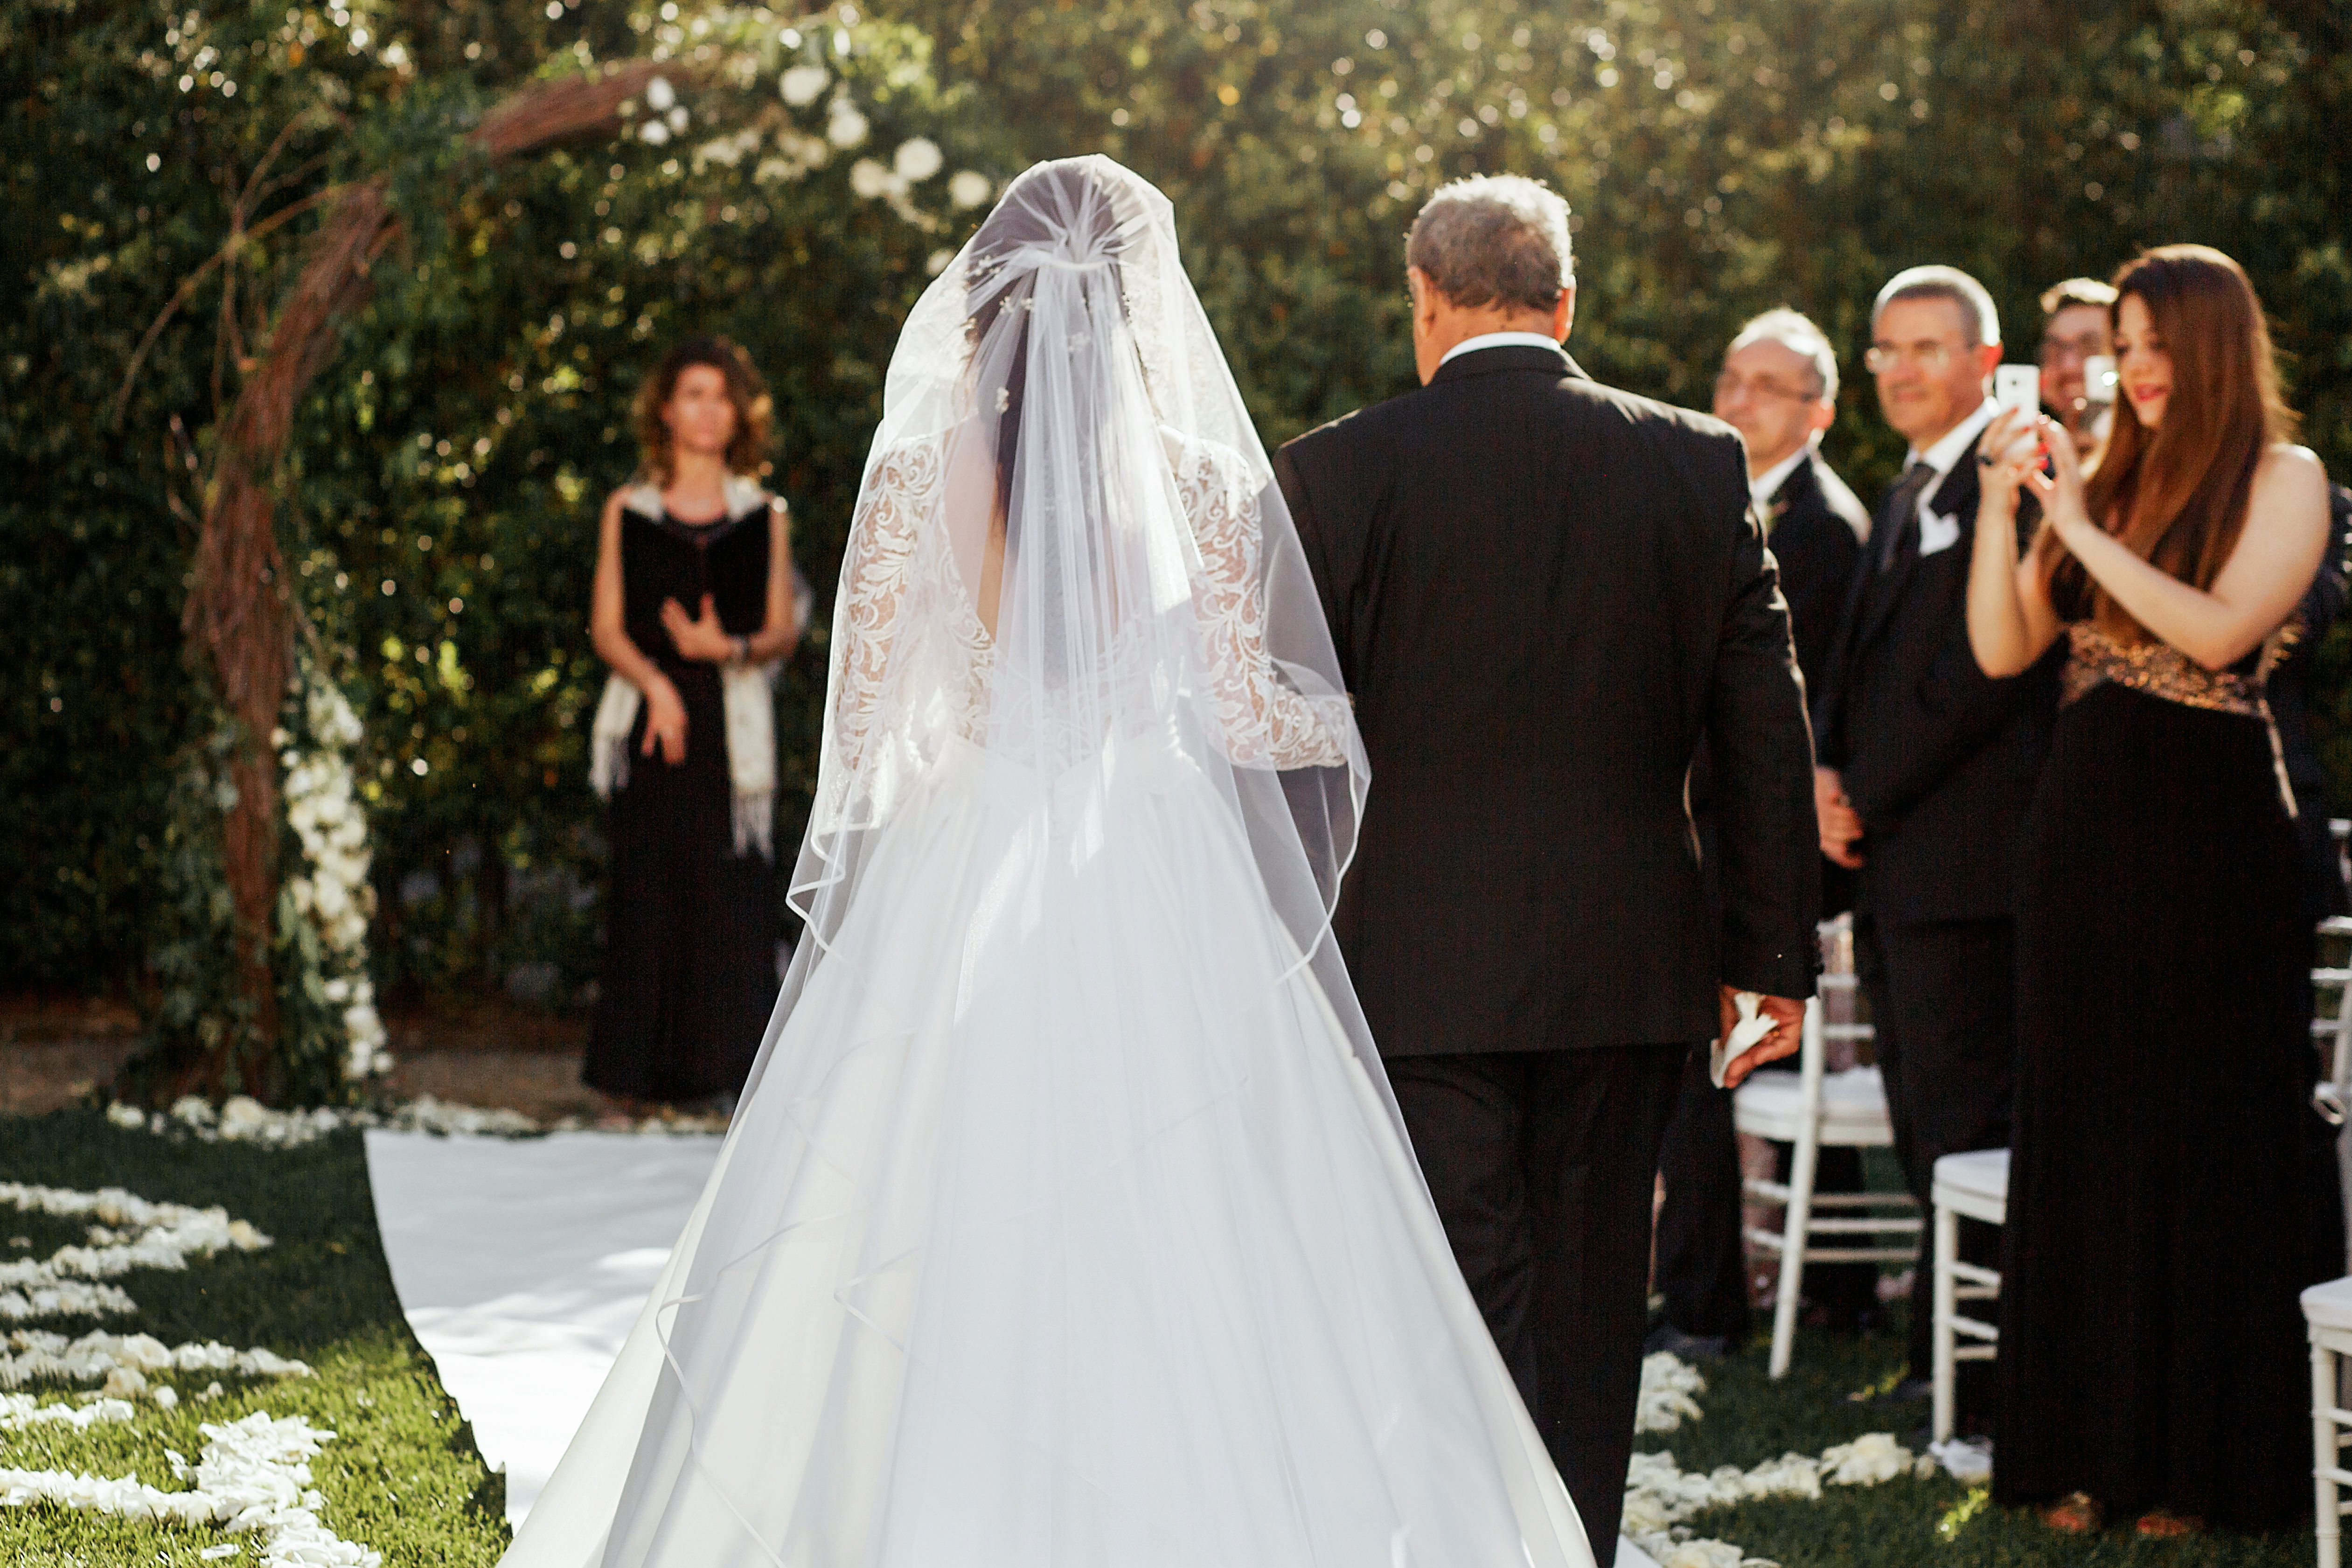 Father walking his daughter down the aisle on her wedding day | Source Shutterstock